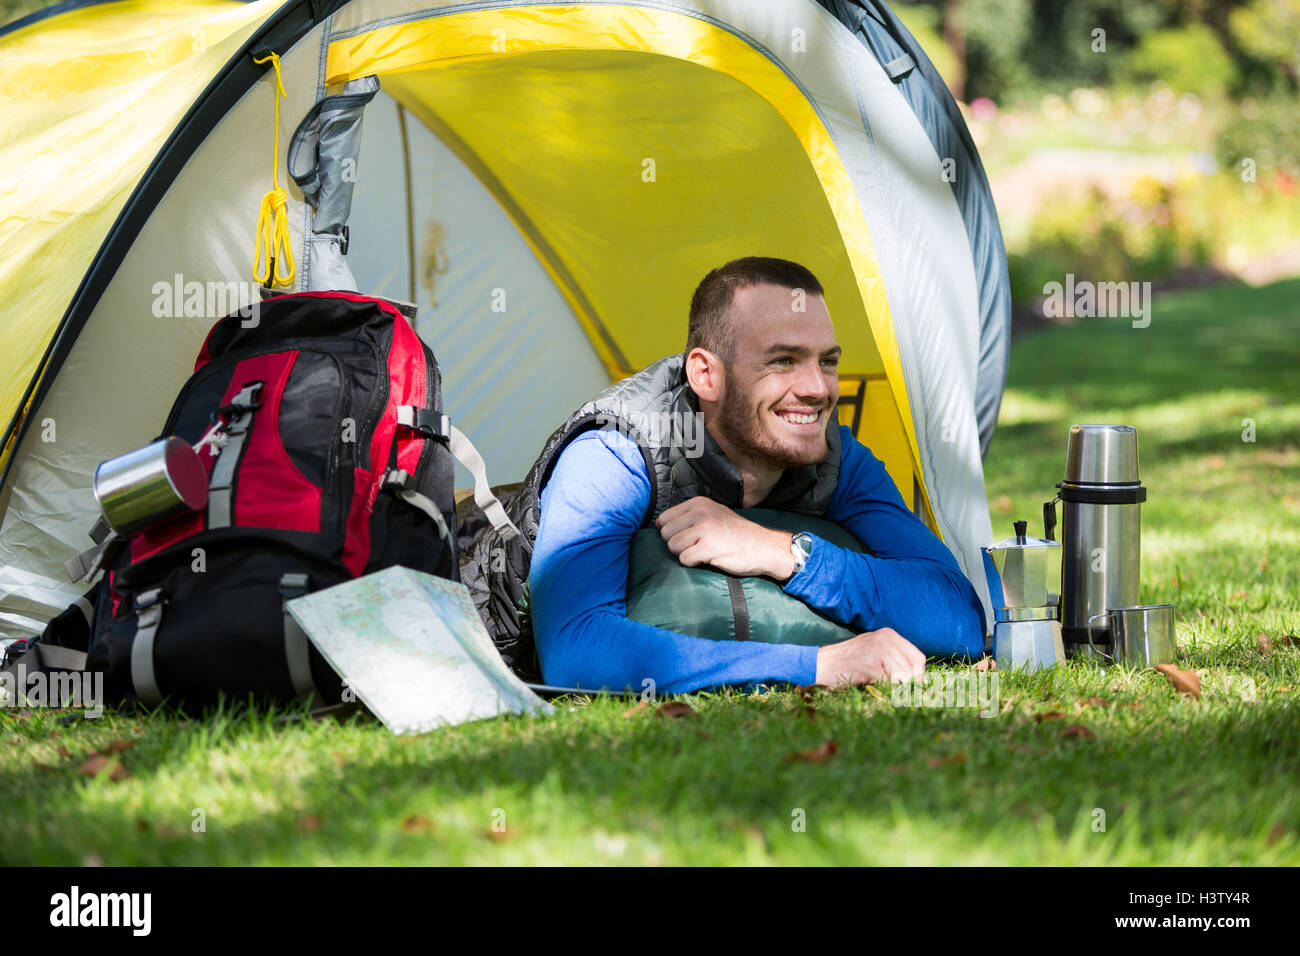 Smiling hiker lying in tent Stock Photo - Alamy